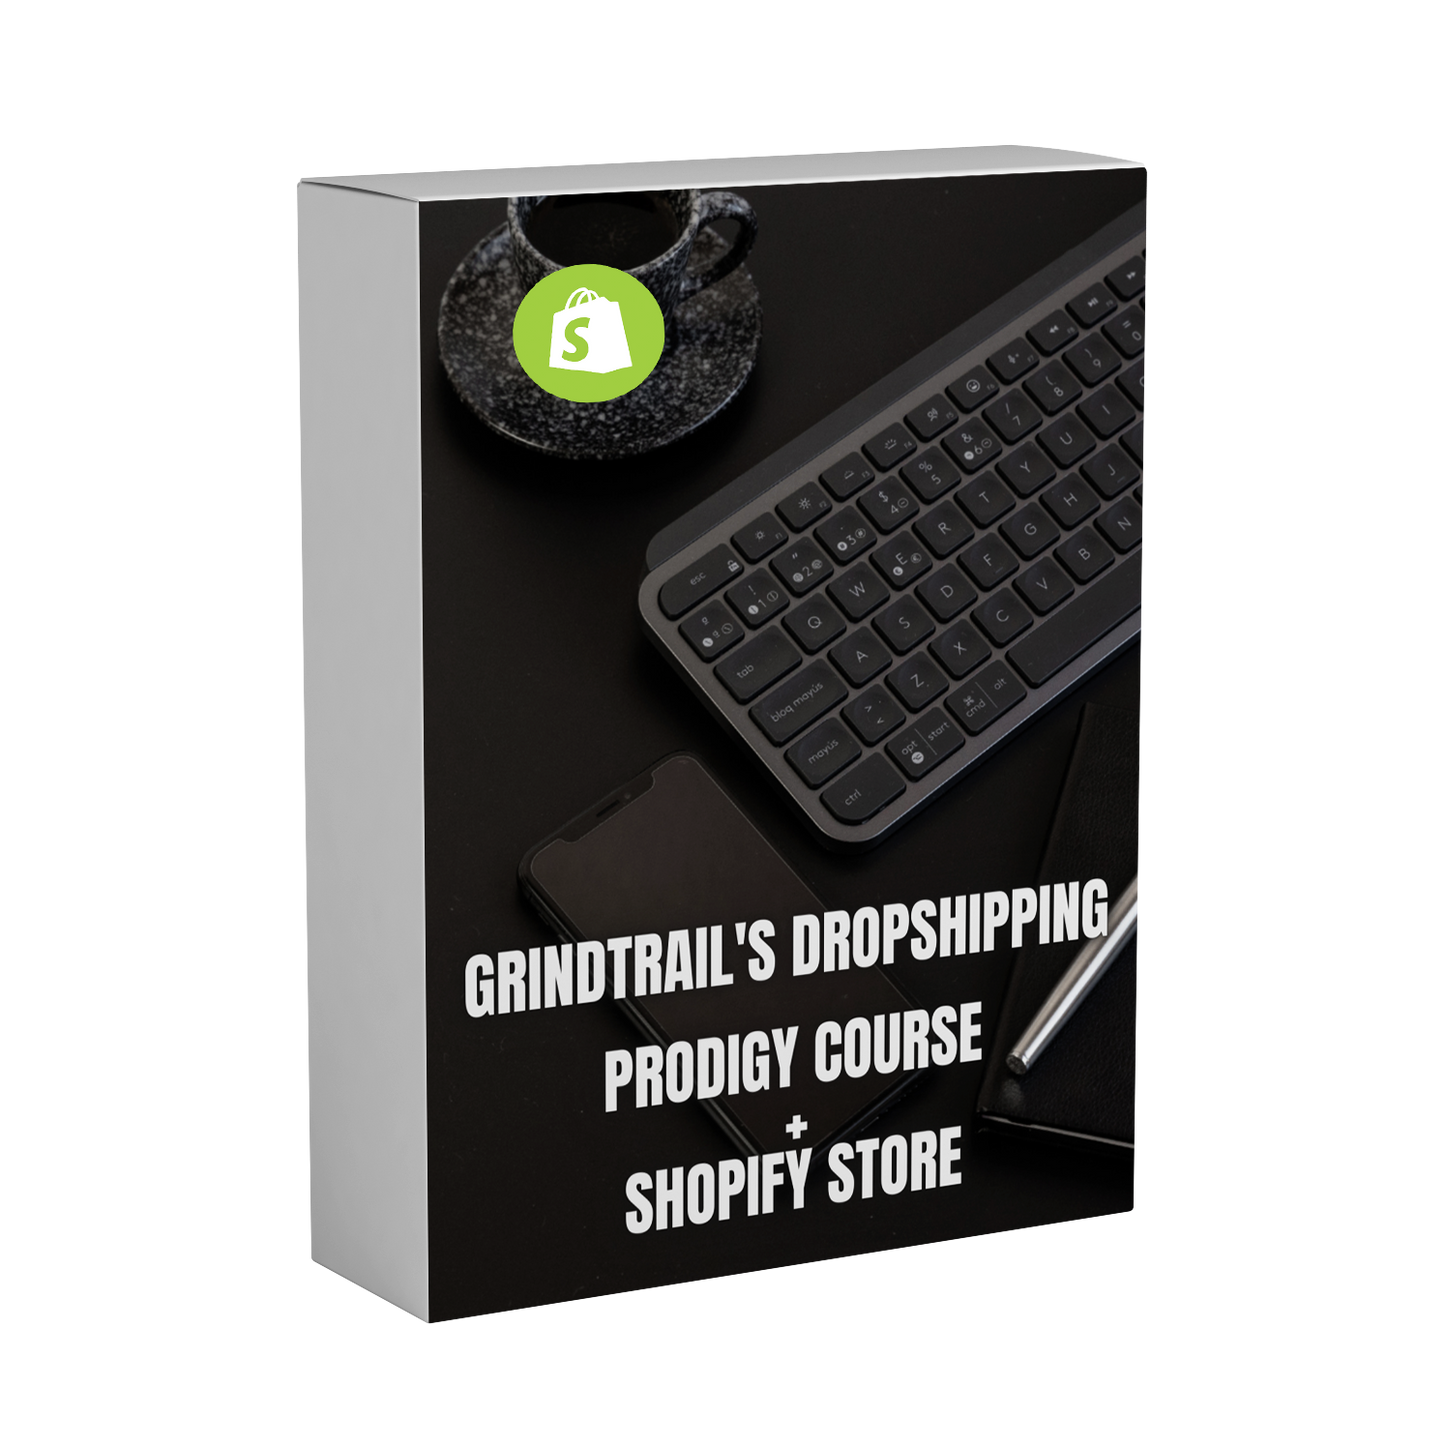 Grindtrail's Dropshipping Prodigy Course + Shopify Store